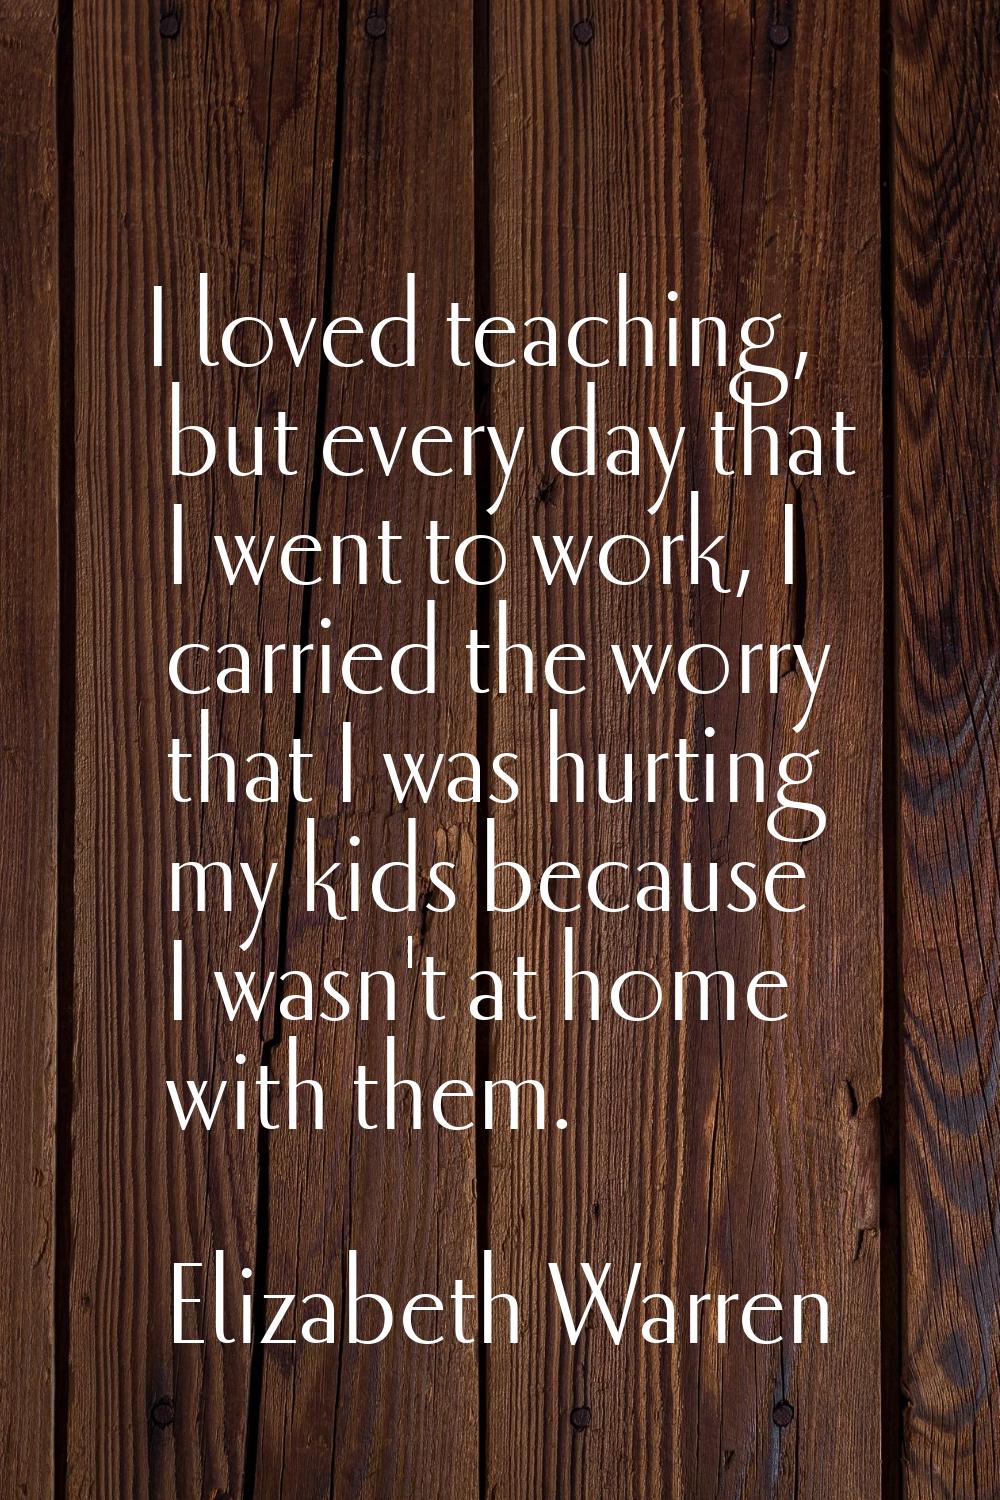 I loved teaching, but every day that I went to work, I carried the worry that I was hurting my kids